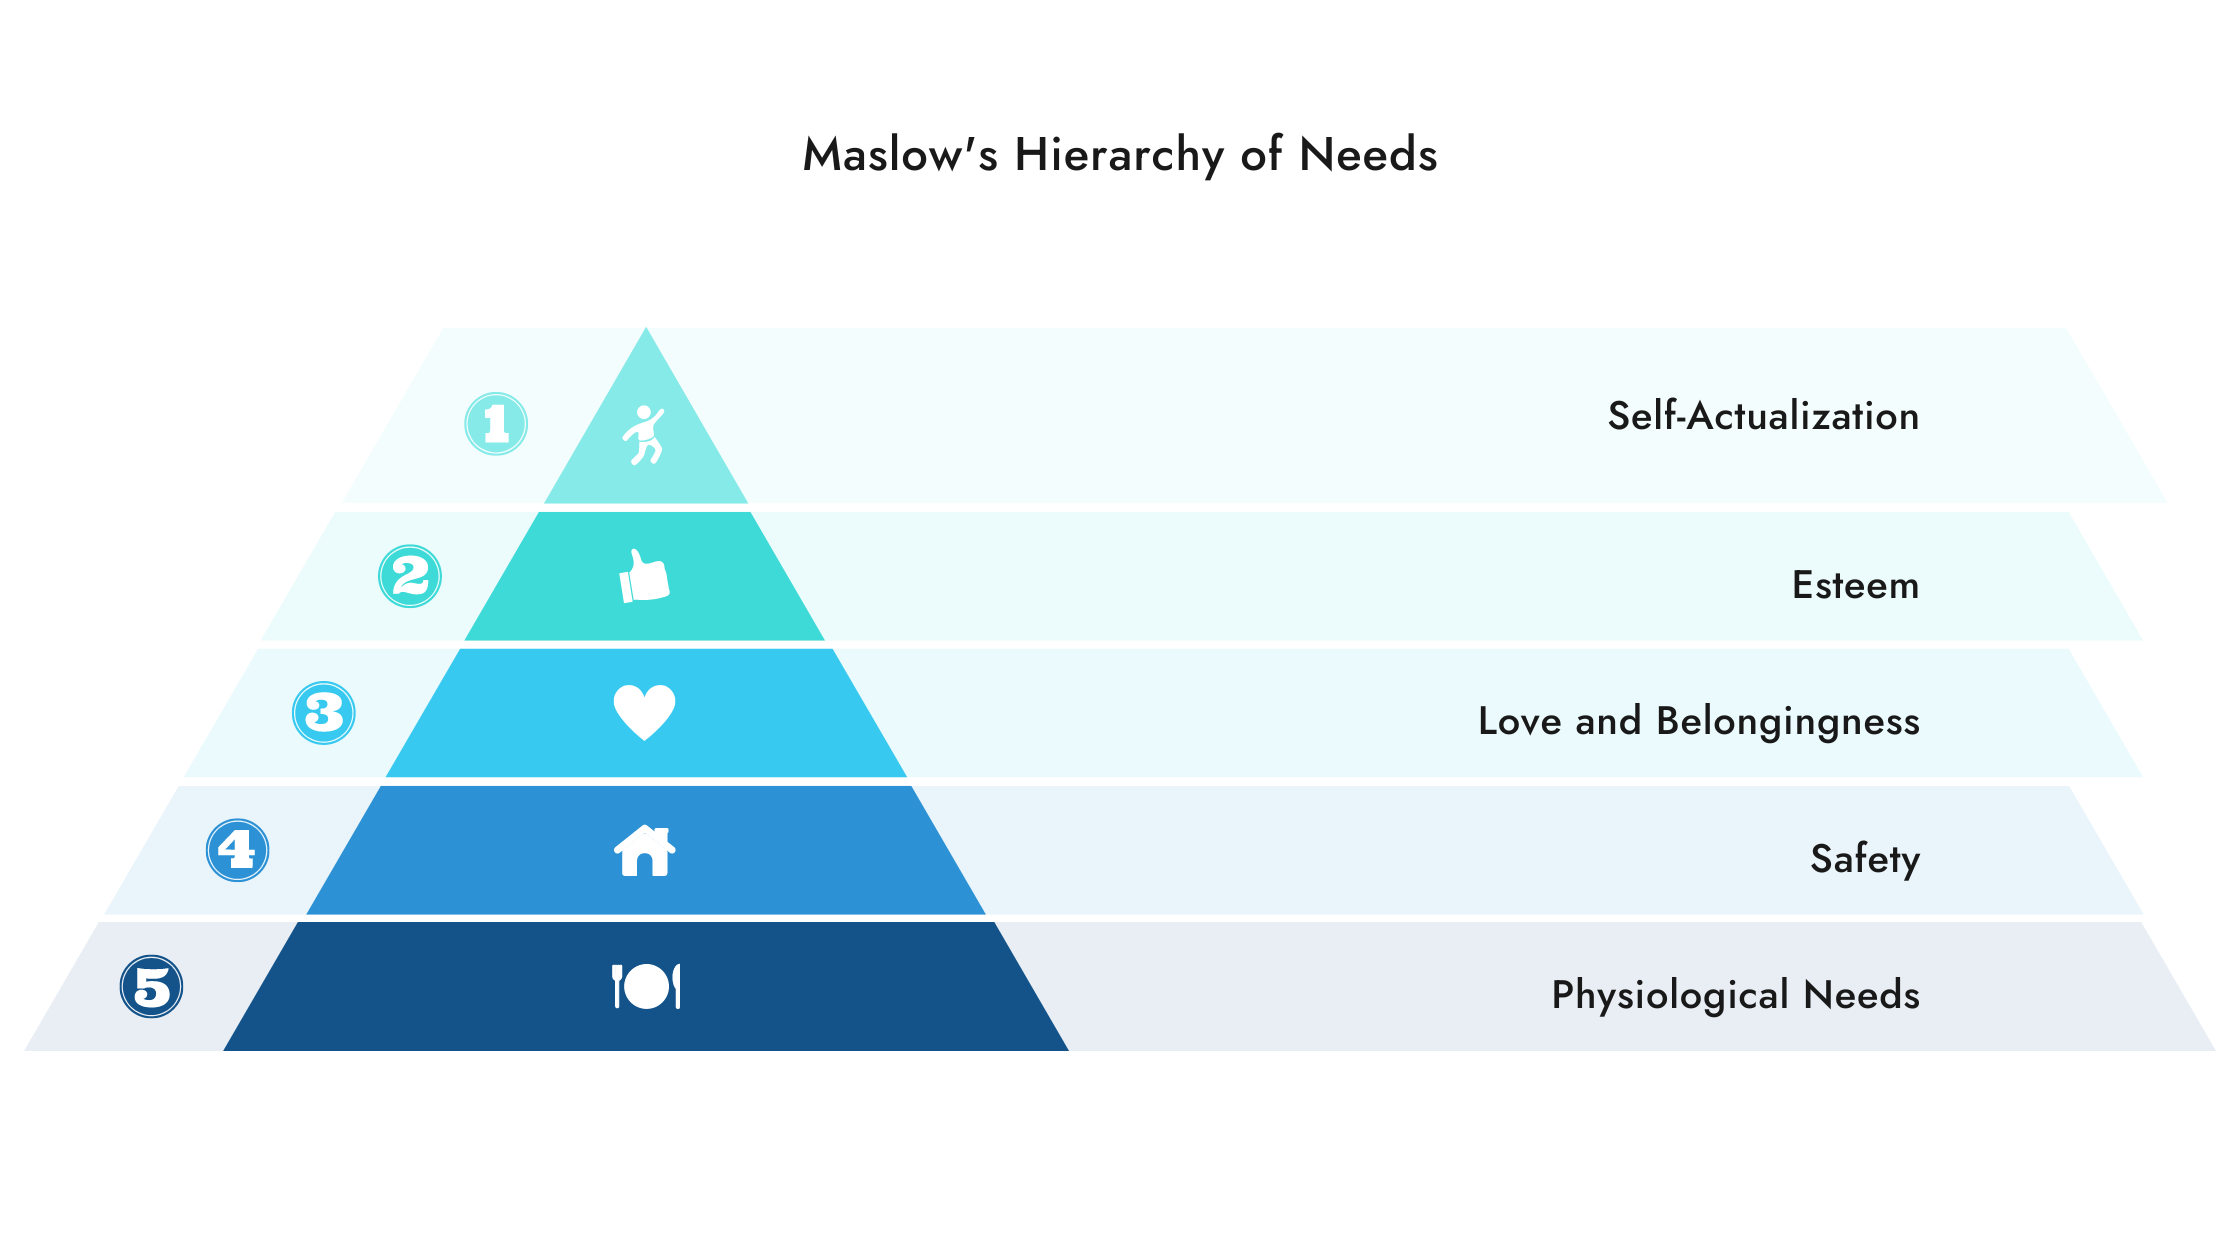 Maslows Hierarchy of needs